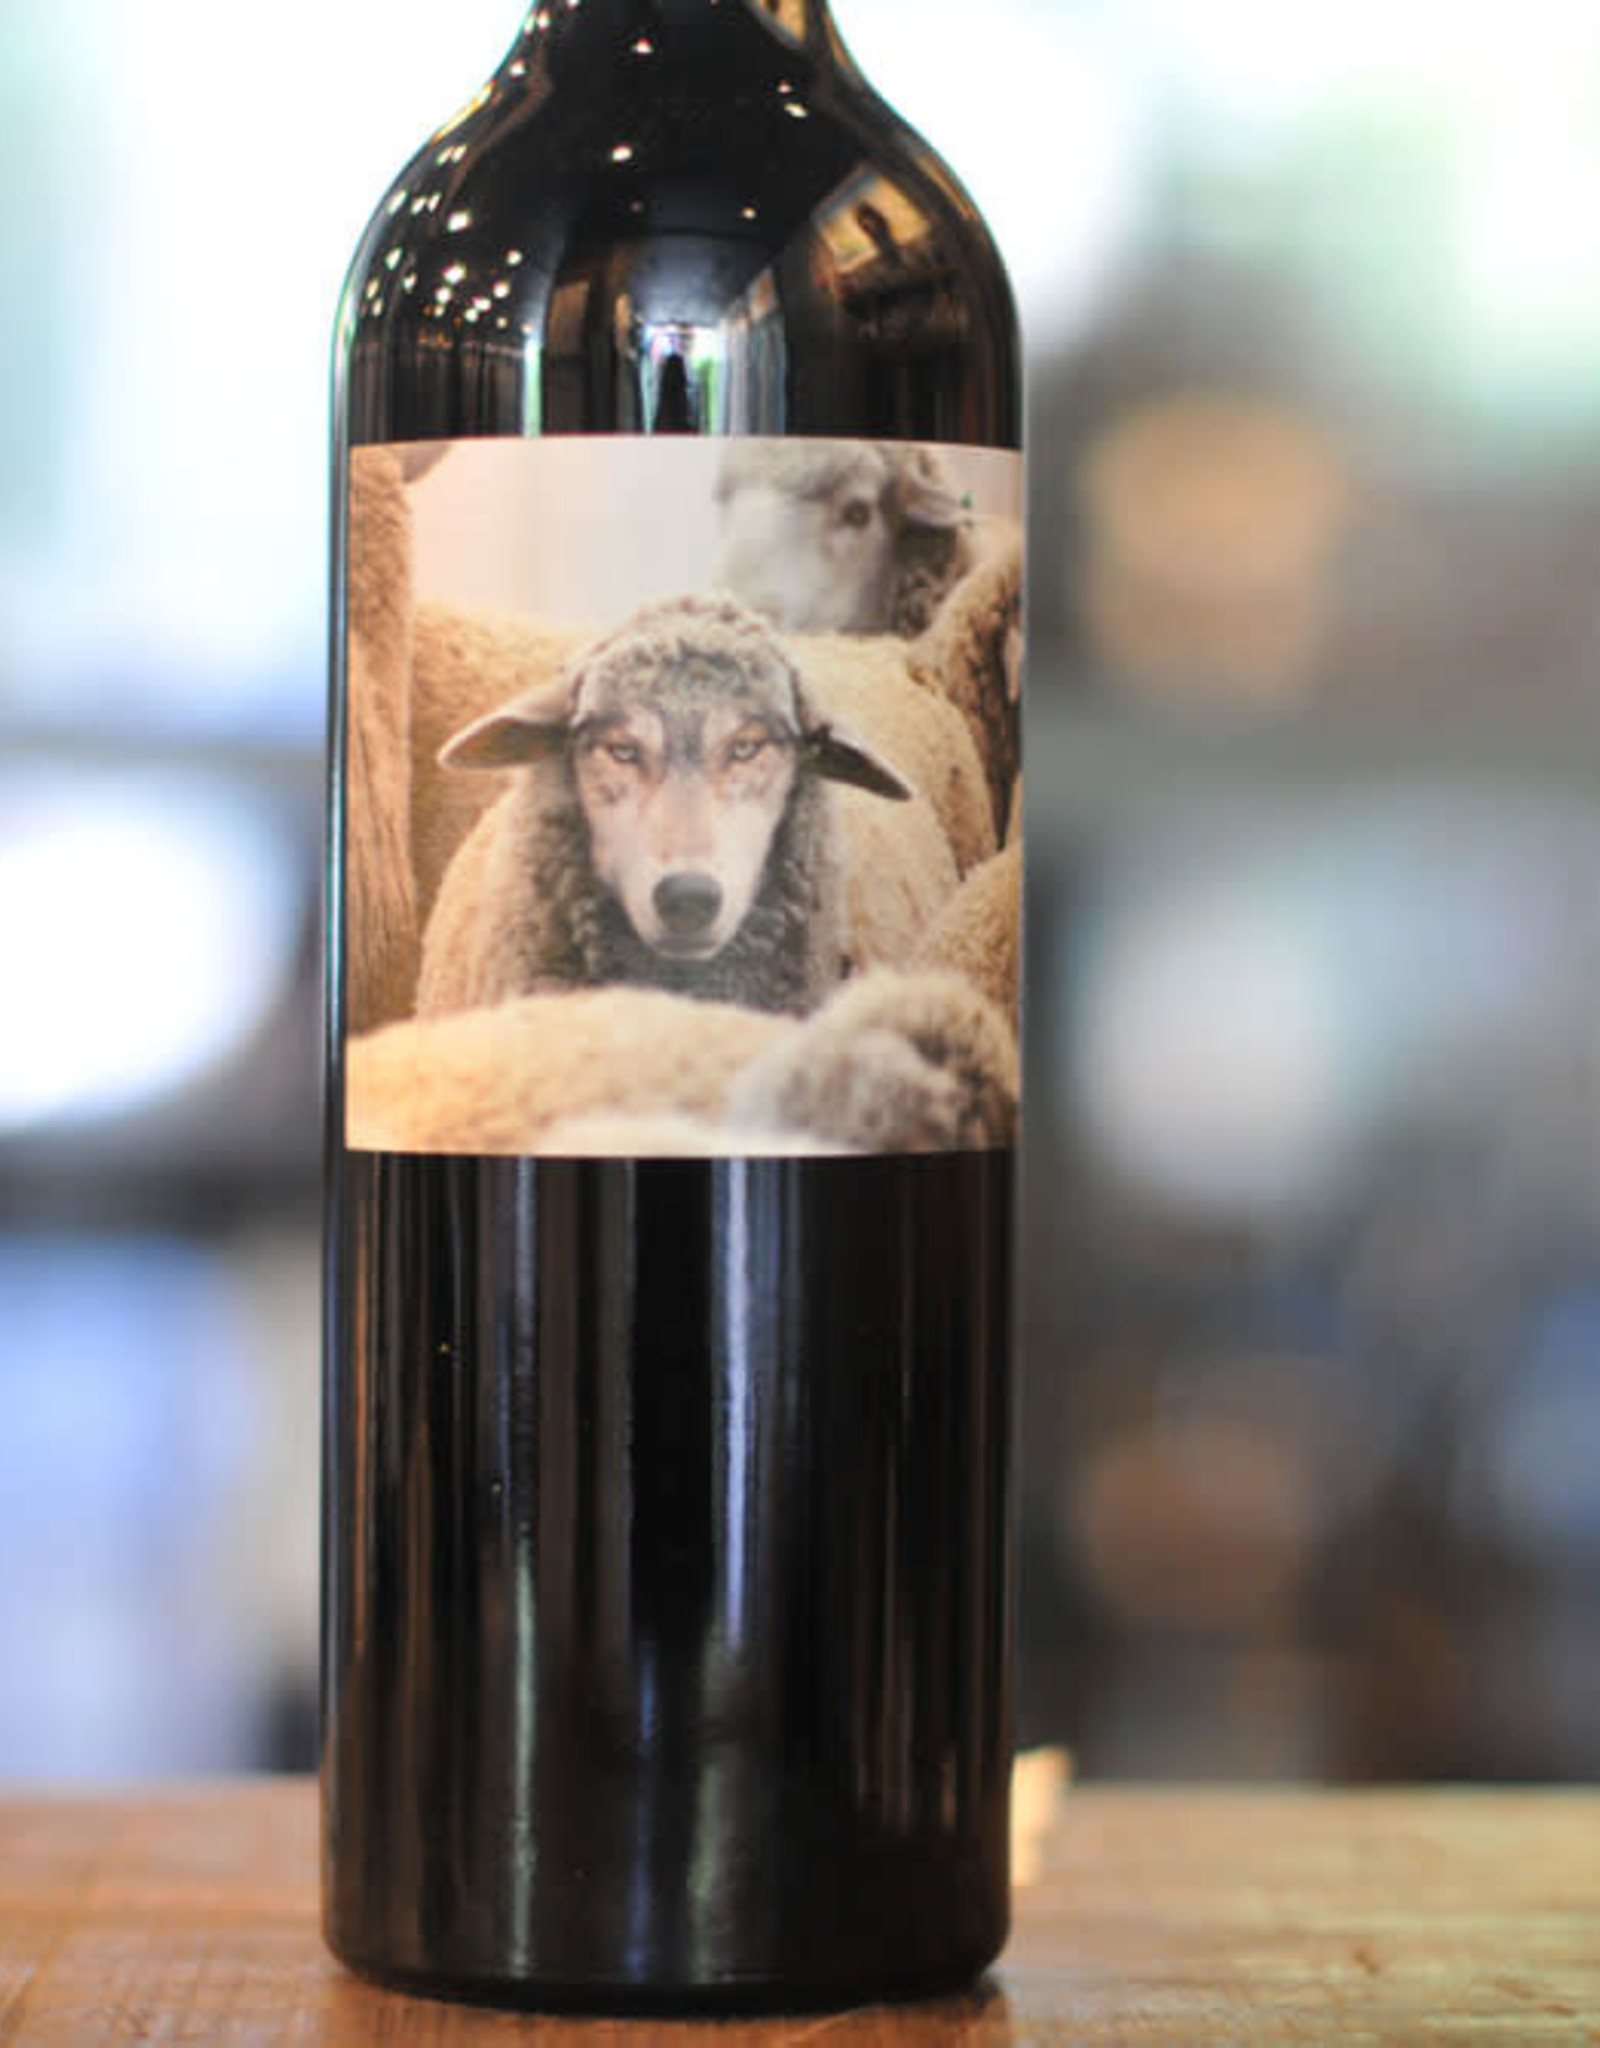 In Sheep's Clothing Cabernet